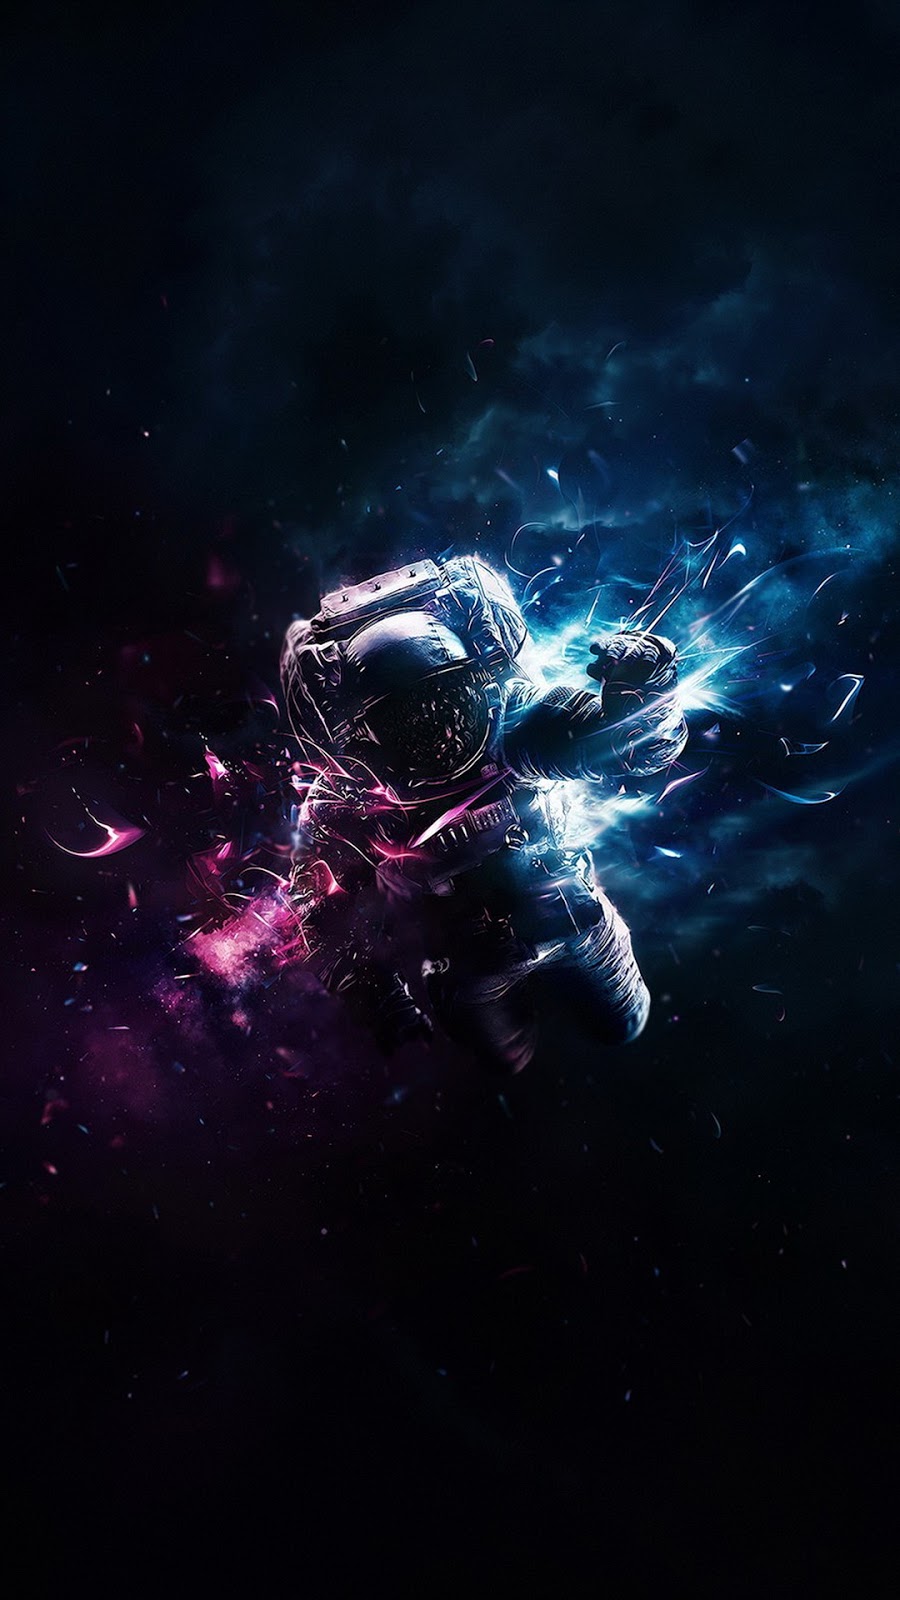 artistic wallpapers for android,darkness,sky,space,outer space,atmosphere